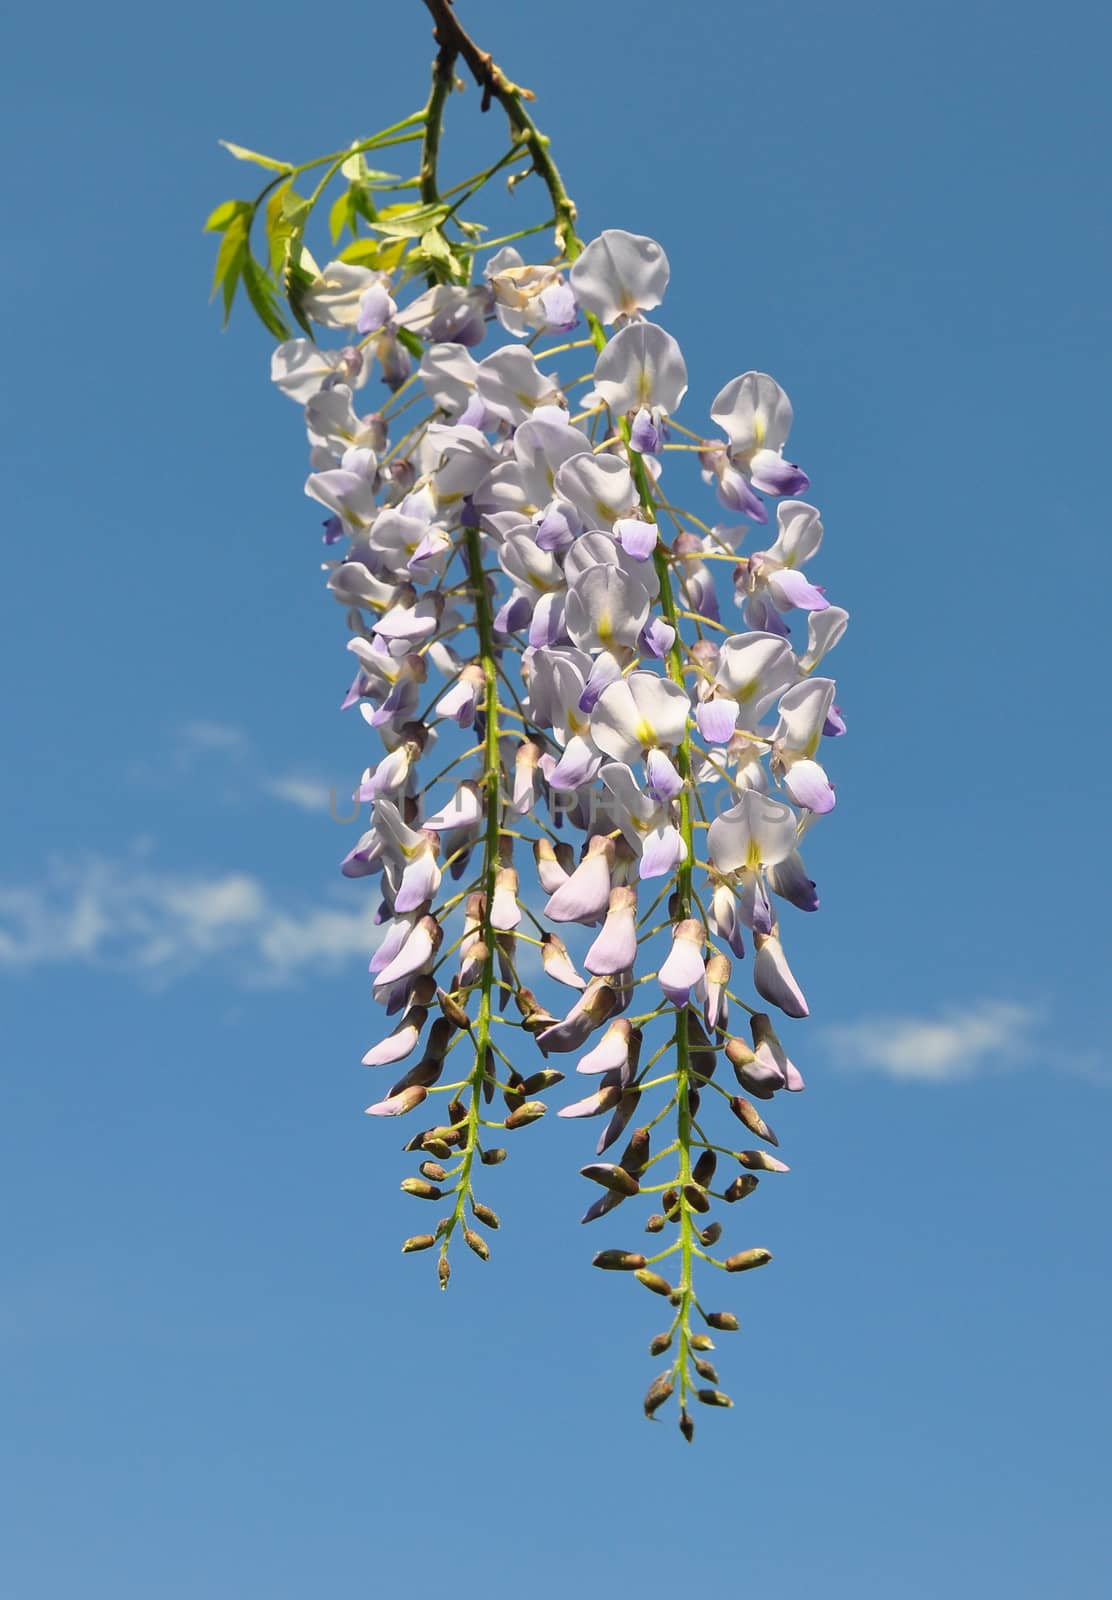 Chinese wisteria (Wisteria sinensis) by rbiedermann